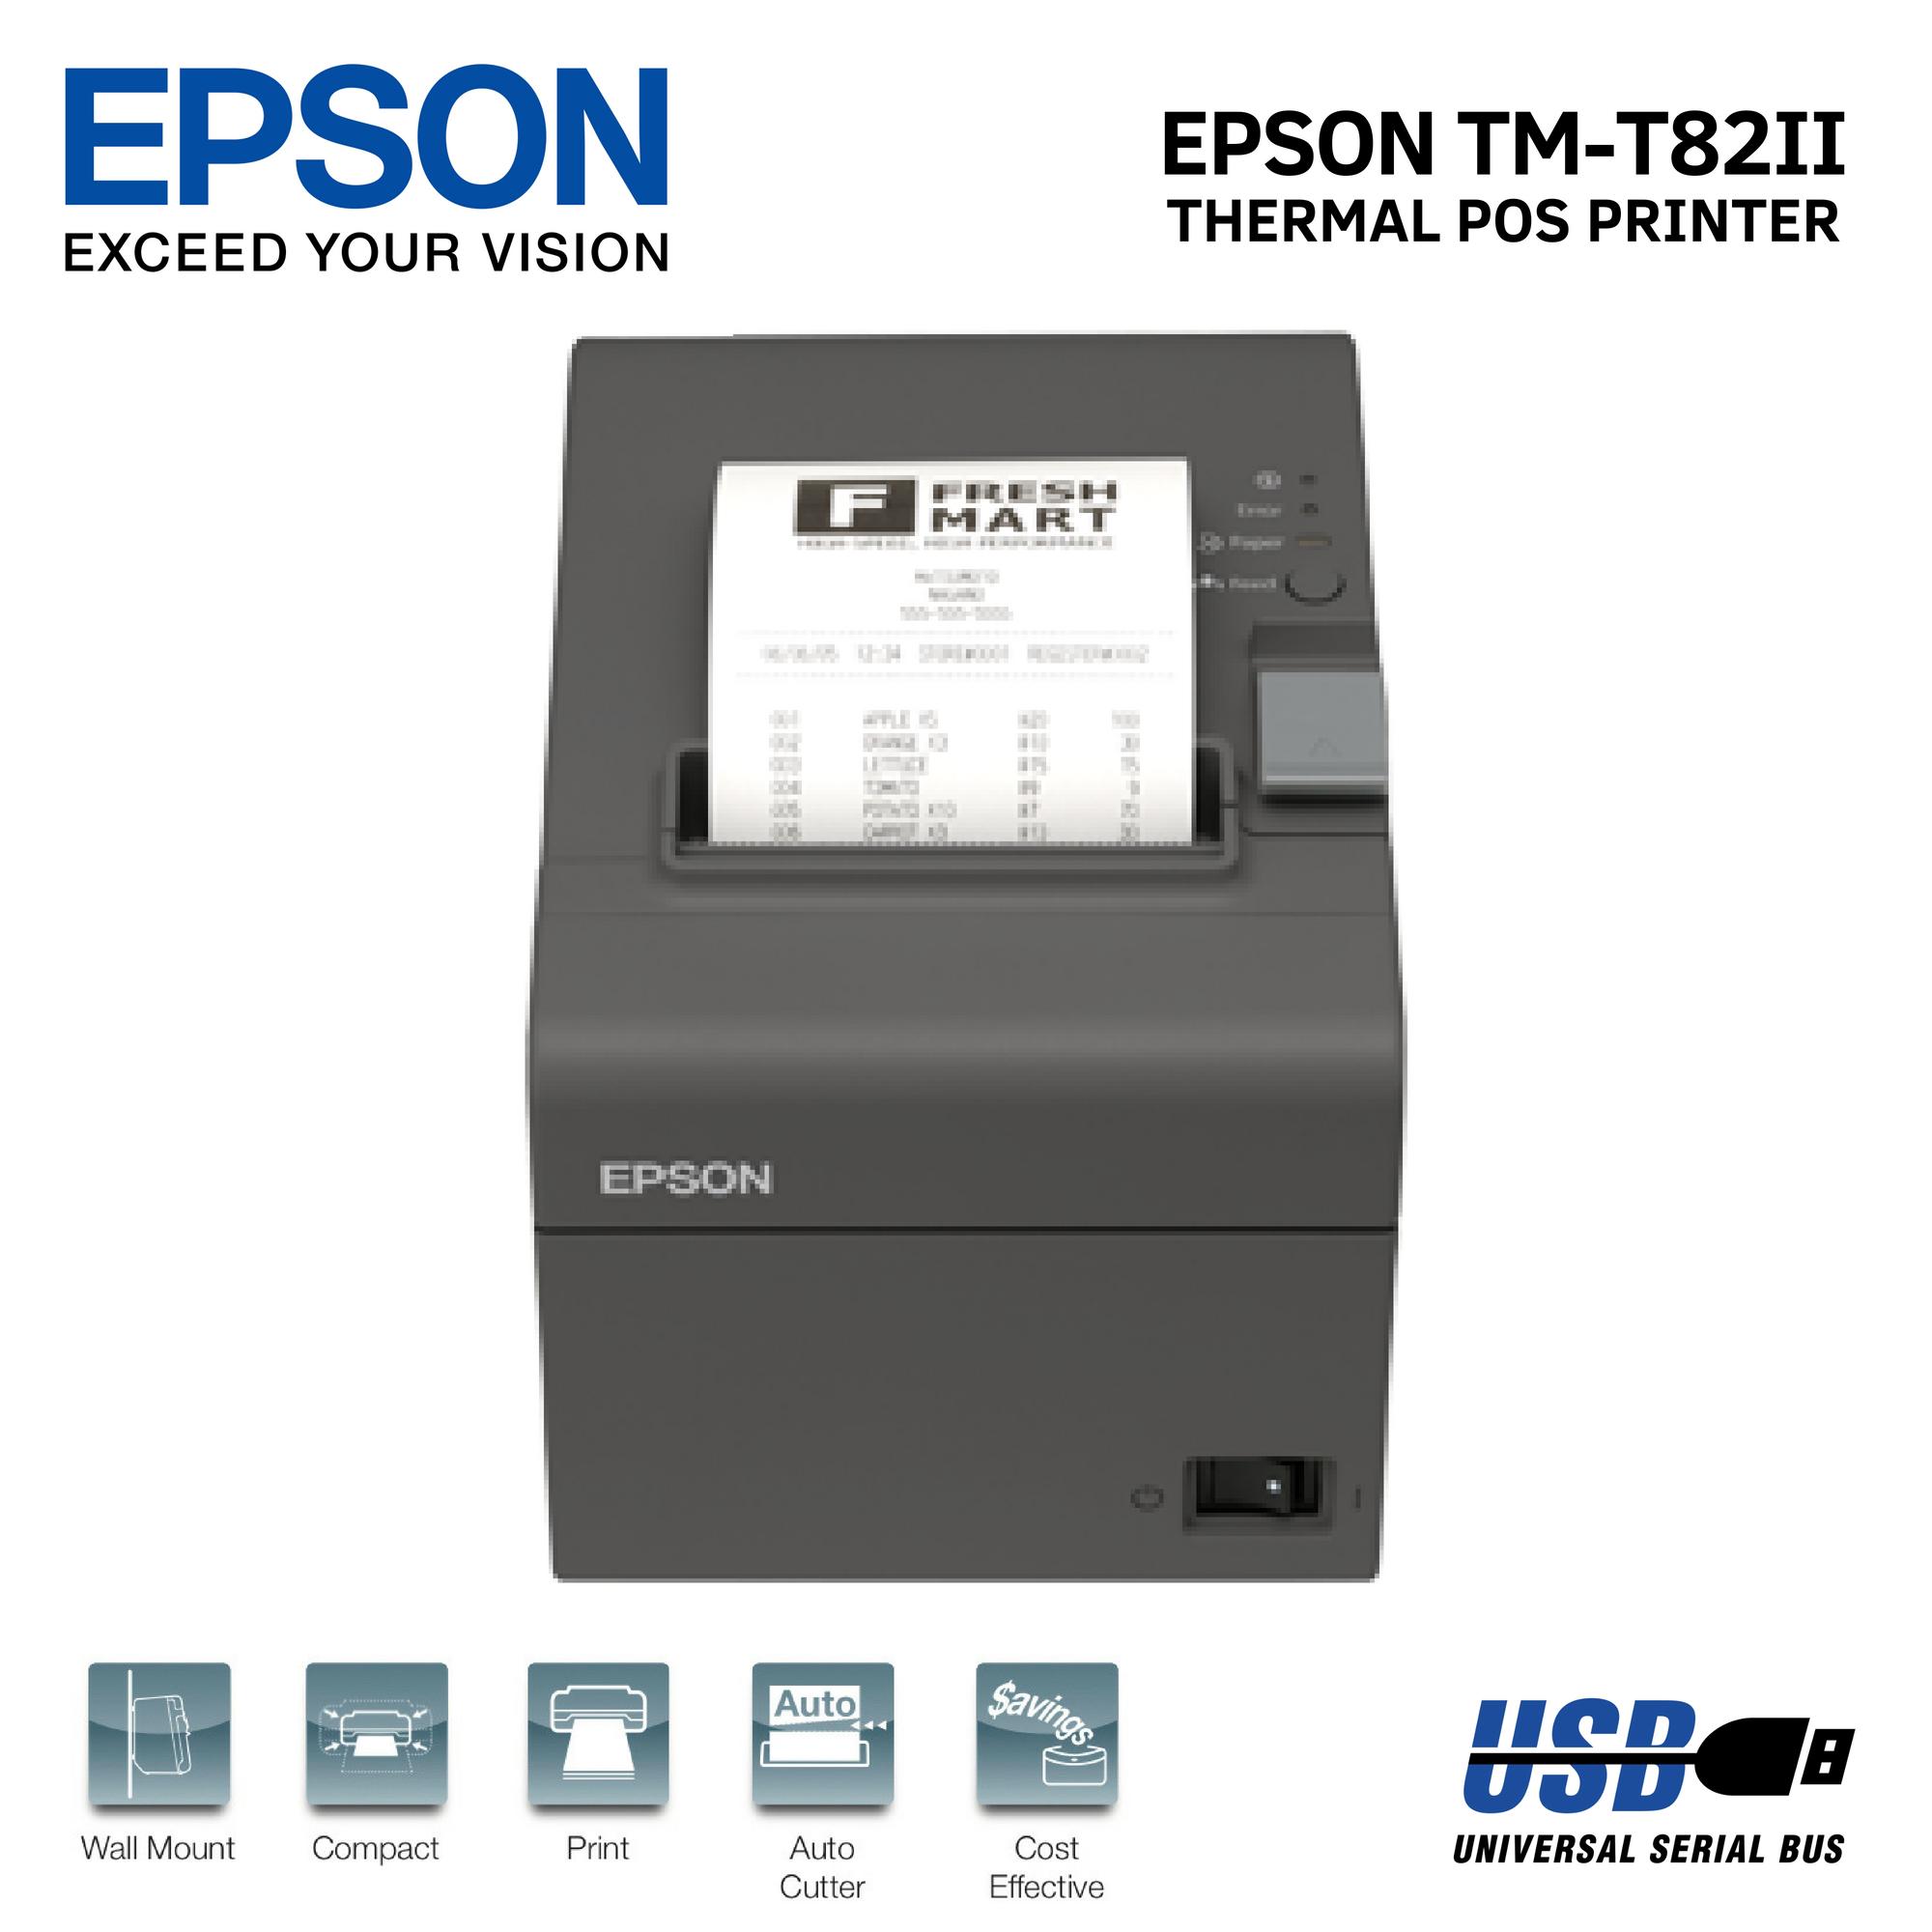 Epson Tm T82ii Thermal Pos Receipt Printer Usb Serial Review And Price 7270